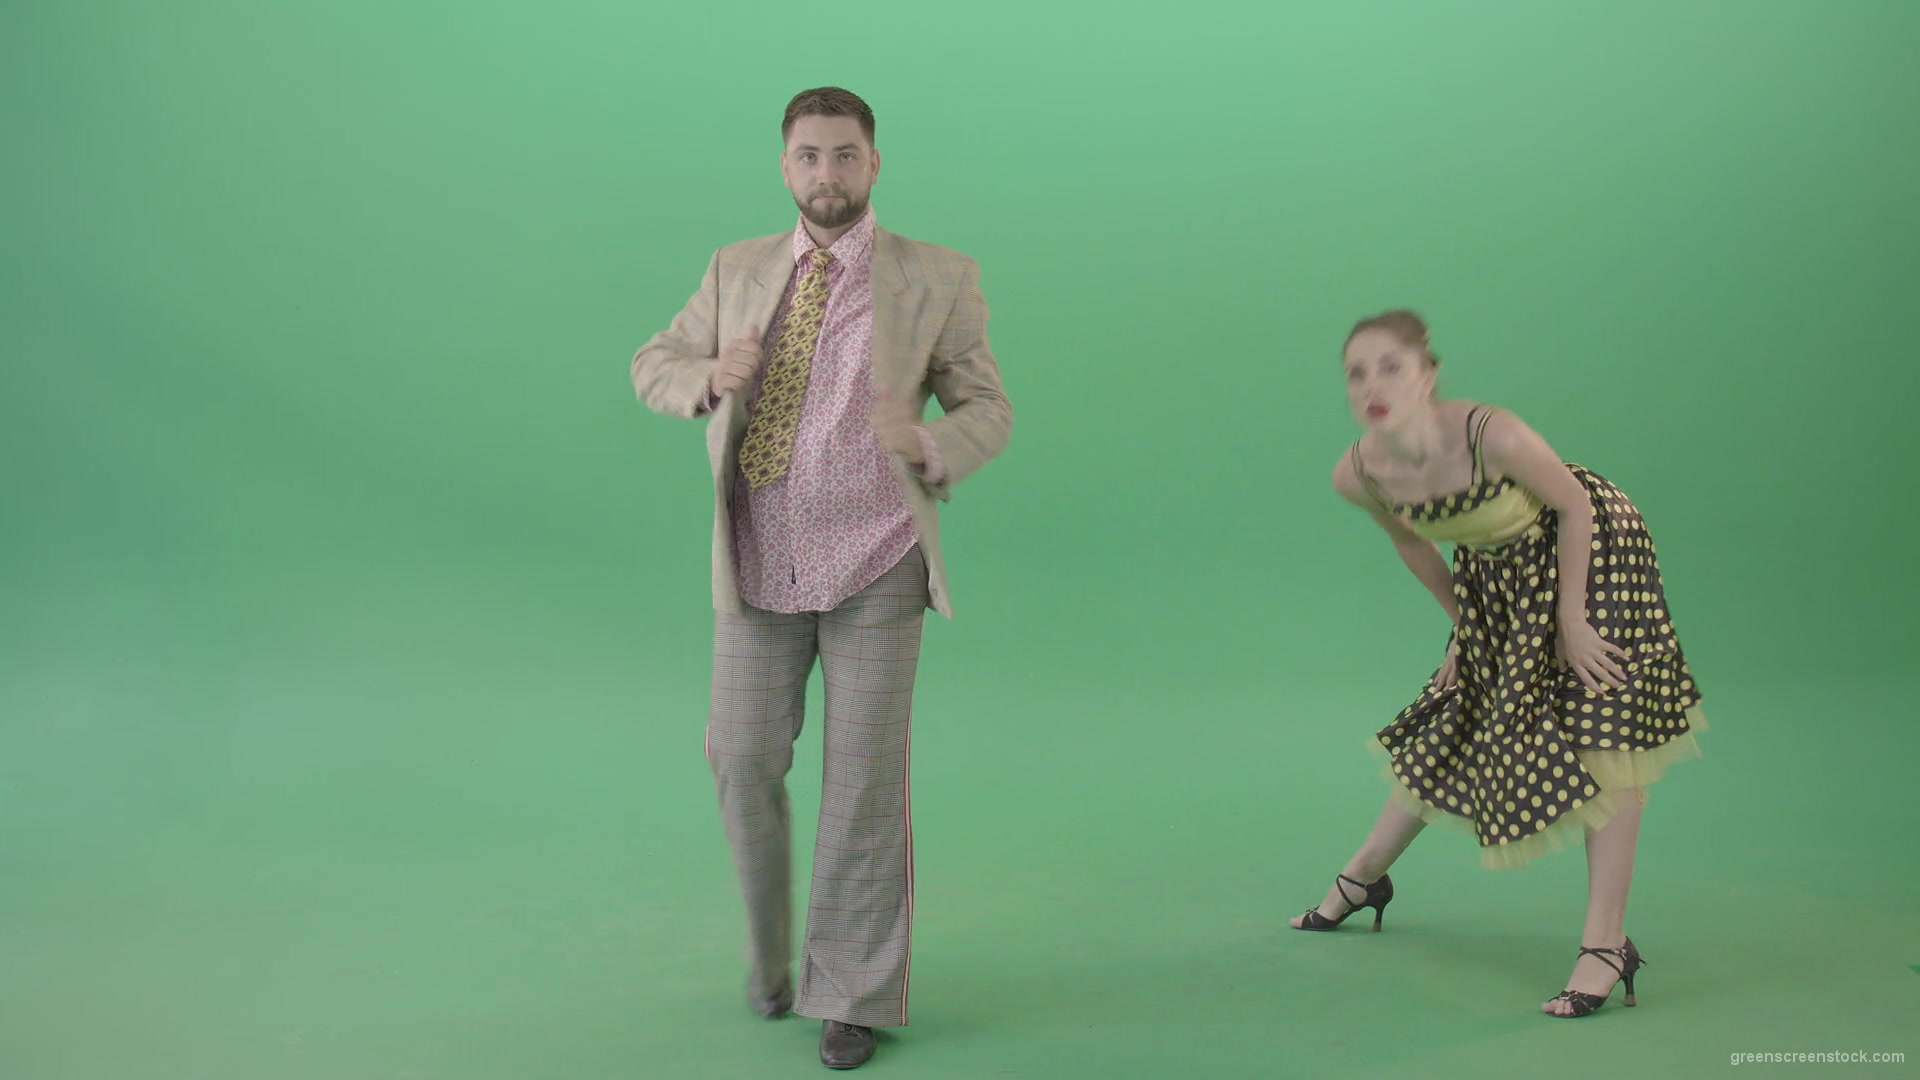 Lovely-couple-jumping-in-Boogie-woogie-dance-isolated-on-Green-Screen-4K-Video-Stock-Footage-1920_009 Green Screen Stock